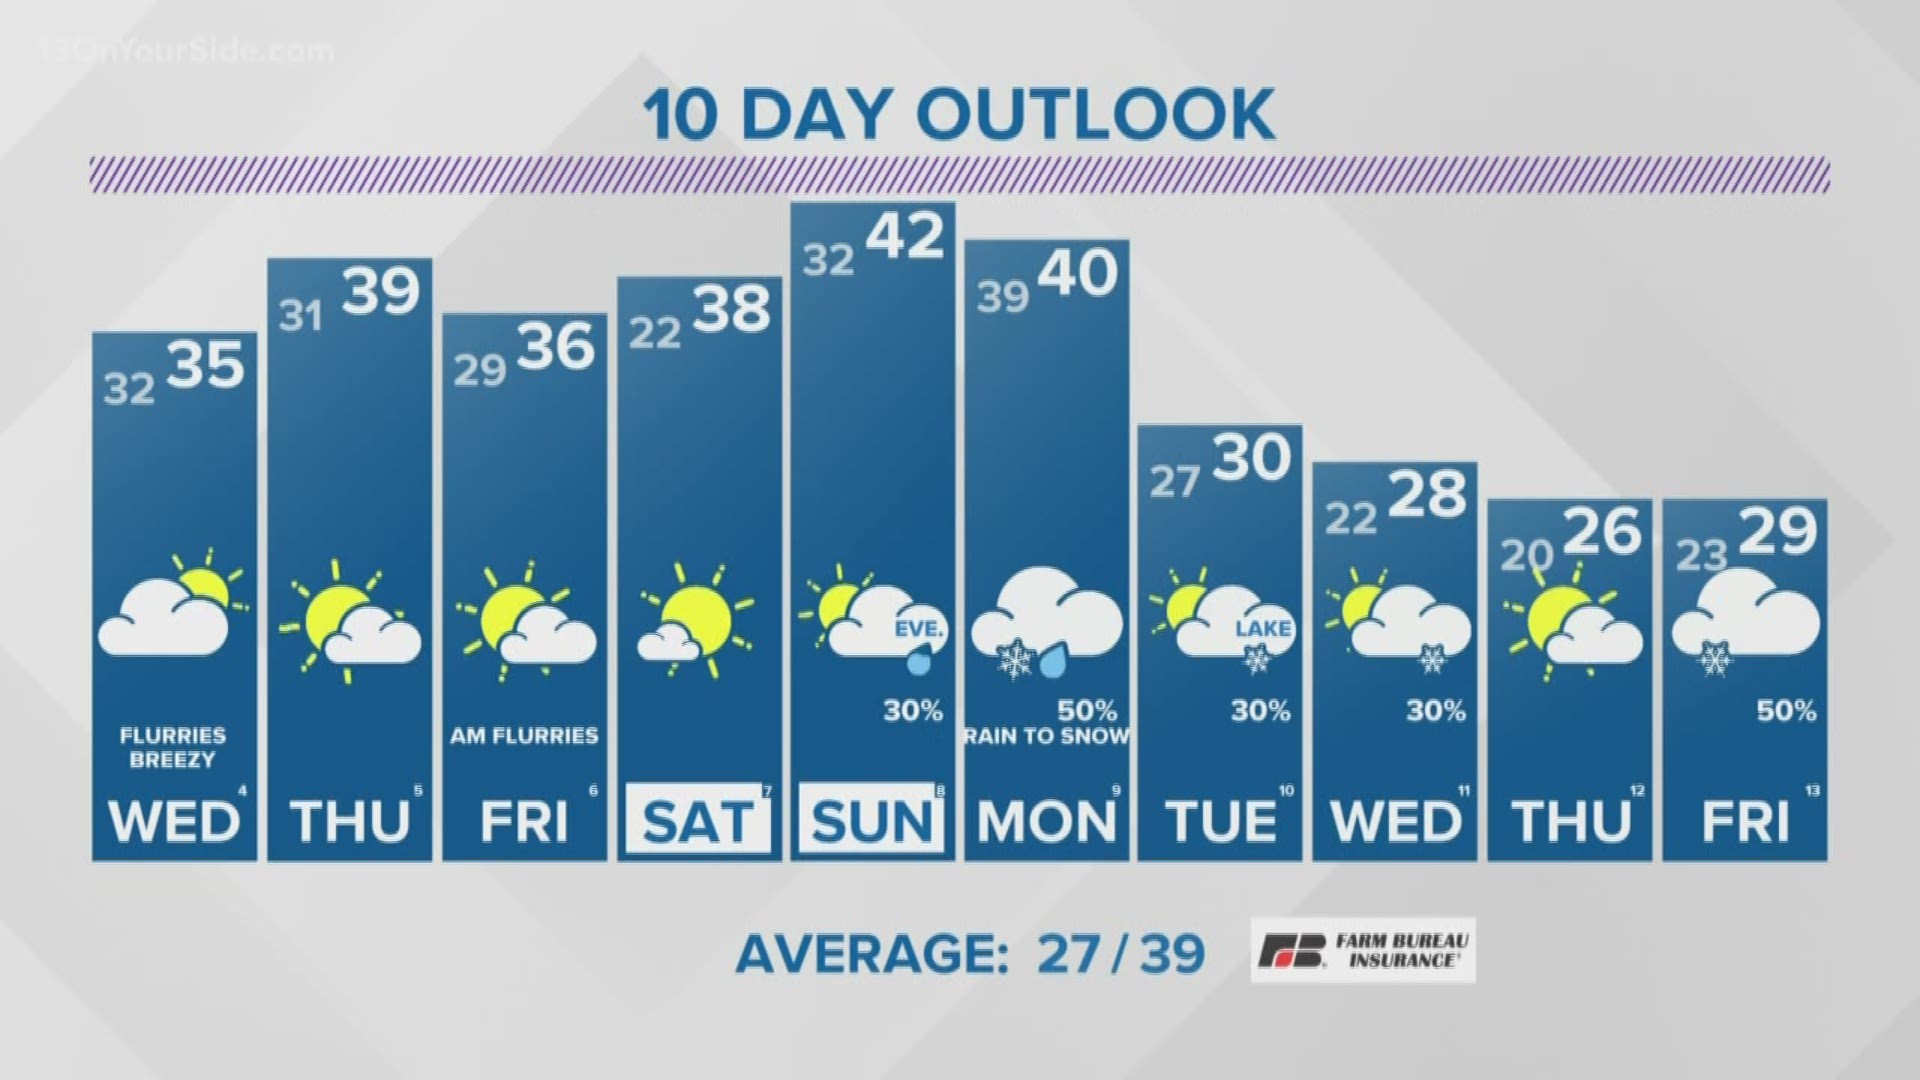 13 On Your Side Forecast: Tuesday night